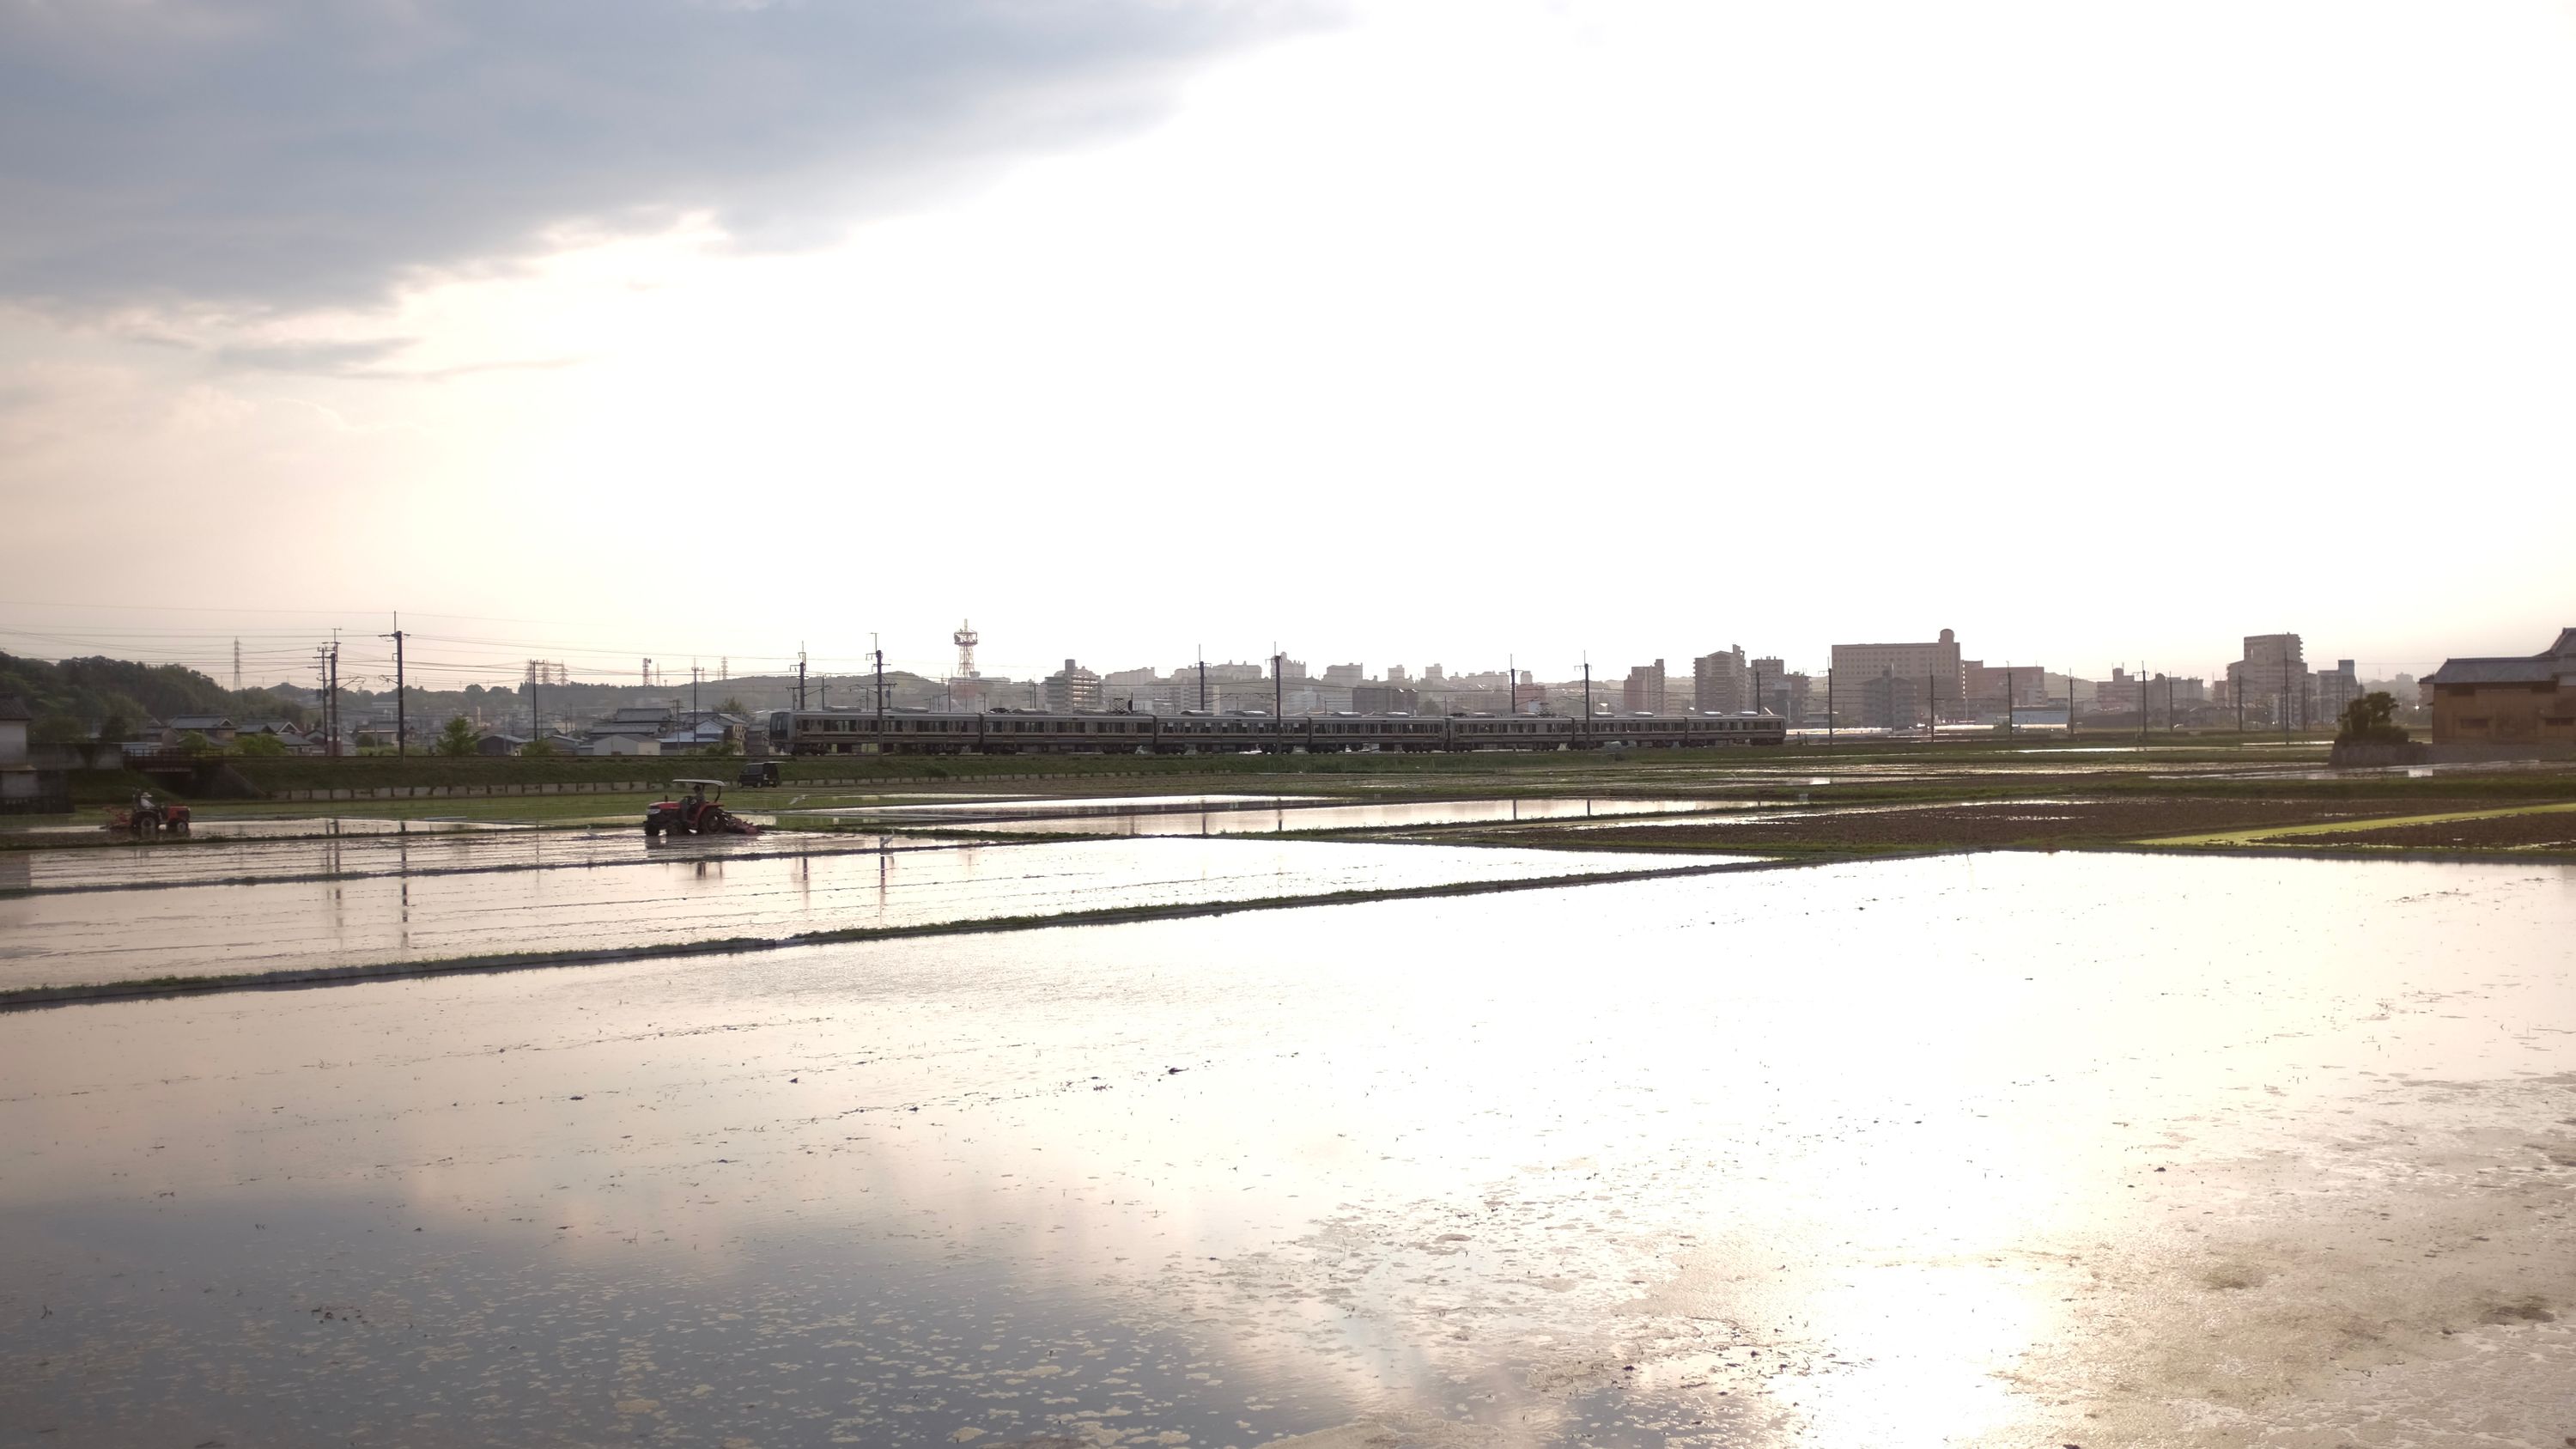 A train passes behind flooded ricefields worked by farmers on small tractors, with the buildings of a city on the horizon.